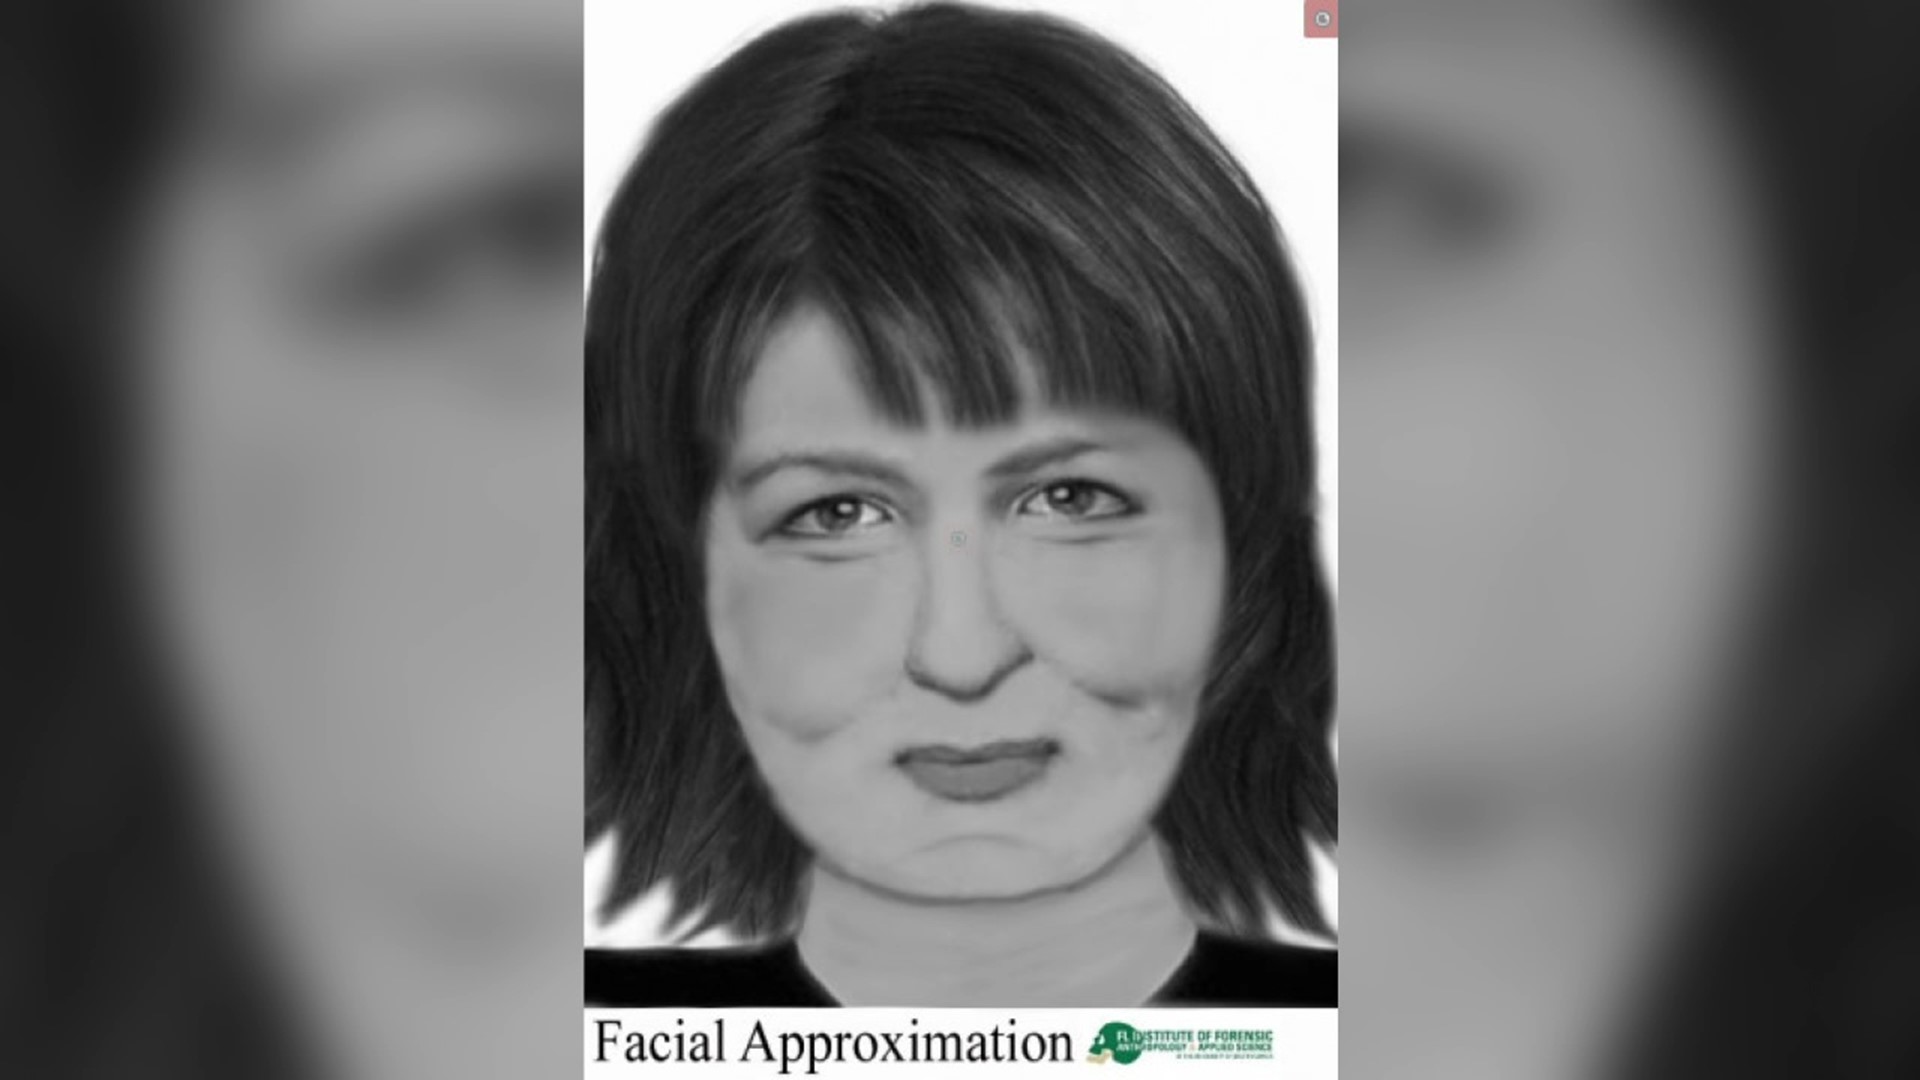 The body of an unidentified woman was found in Sugarloaf Township in 1994.